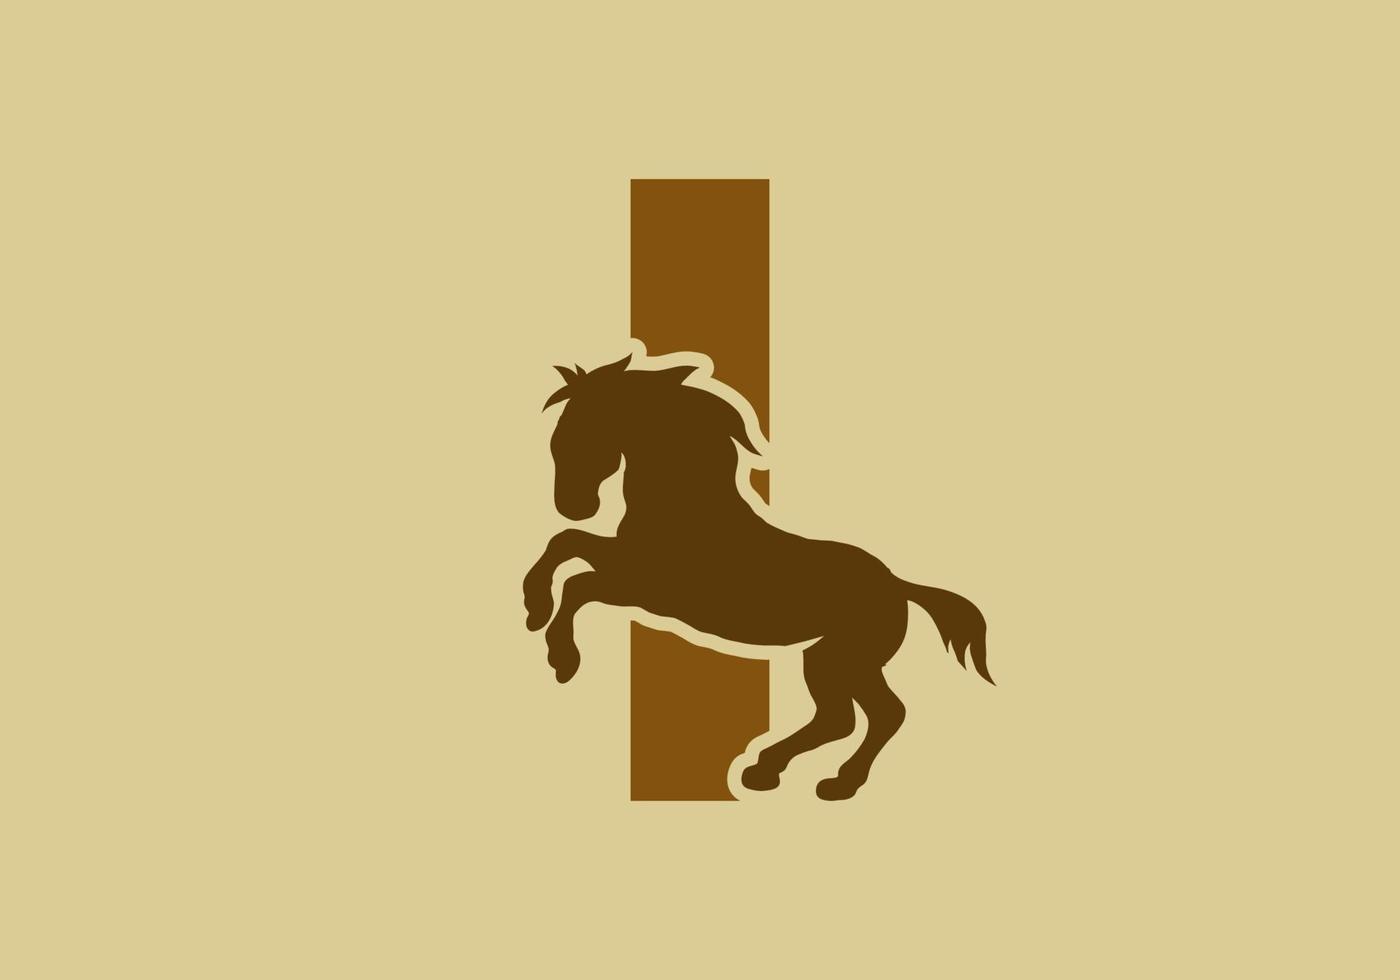 Initial letter i with horse shape vector